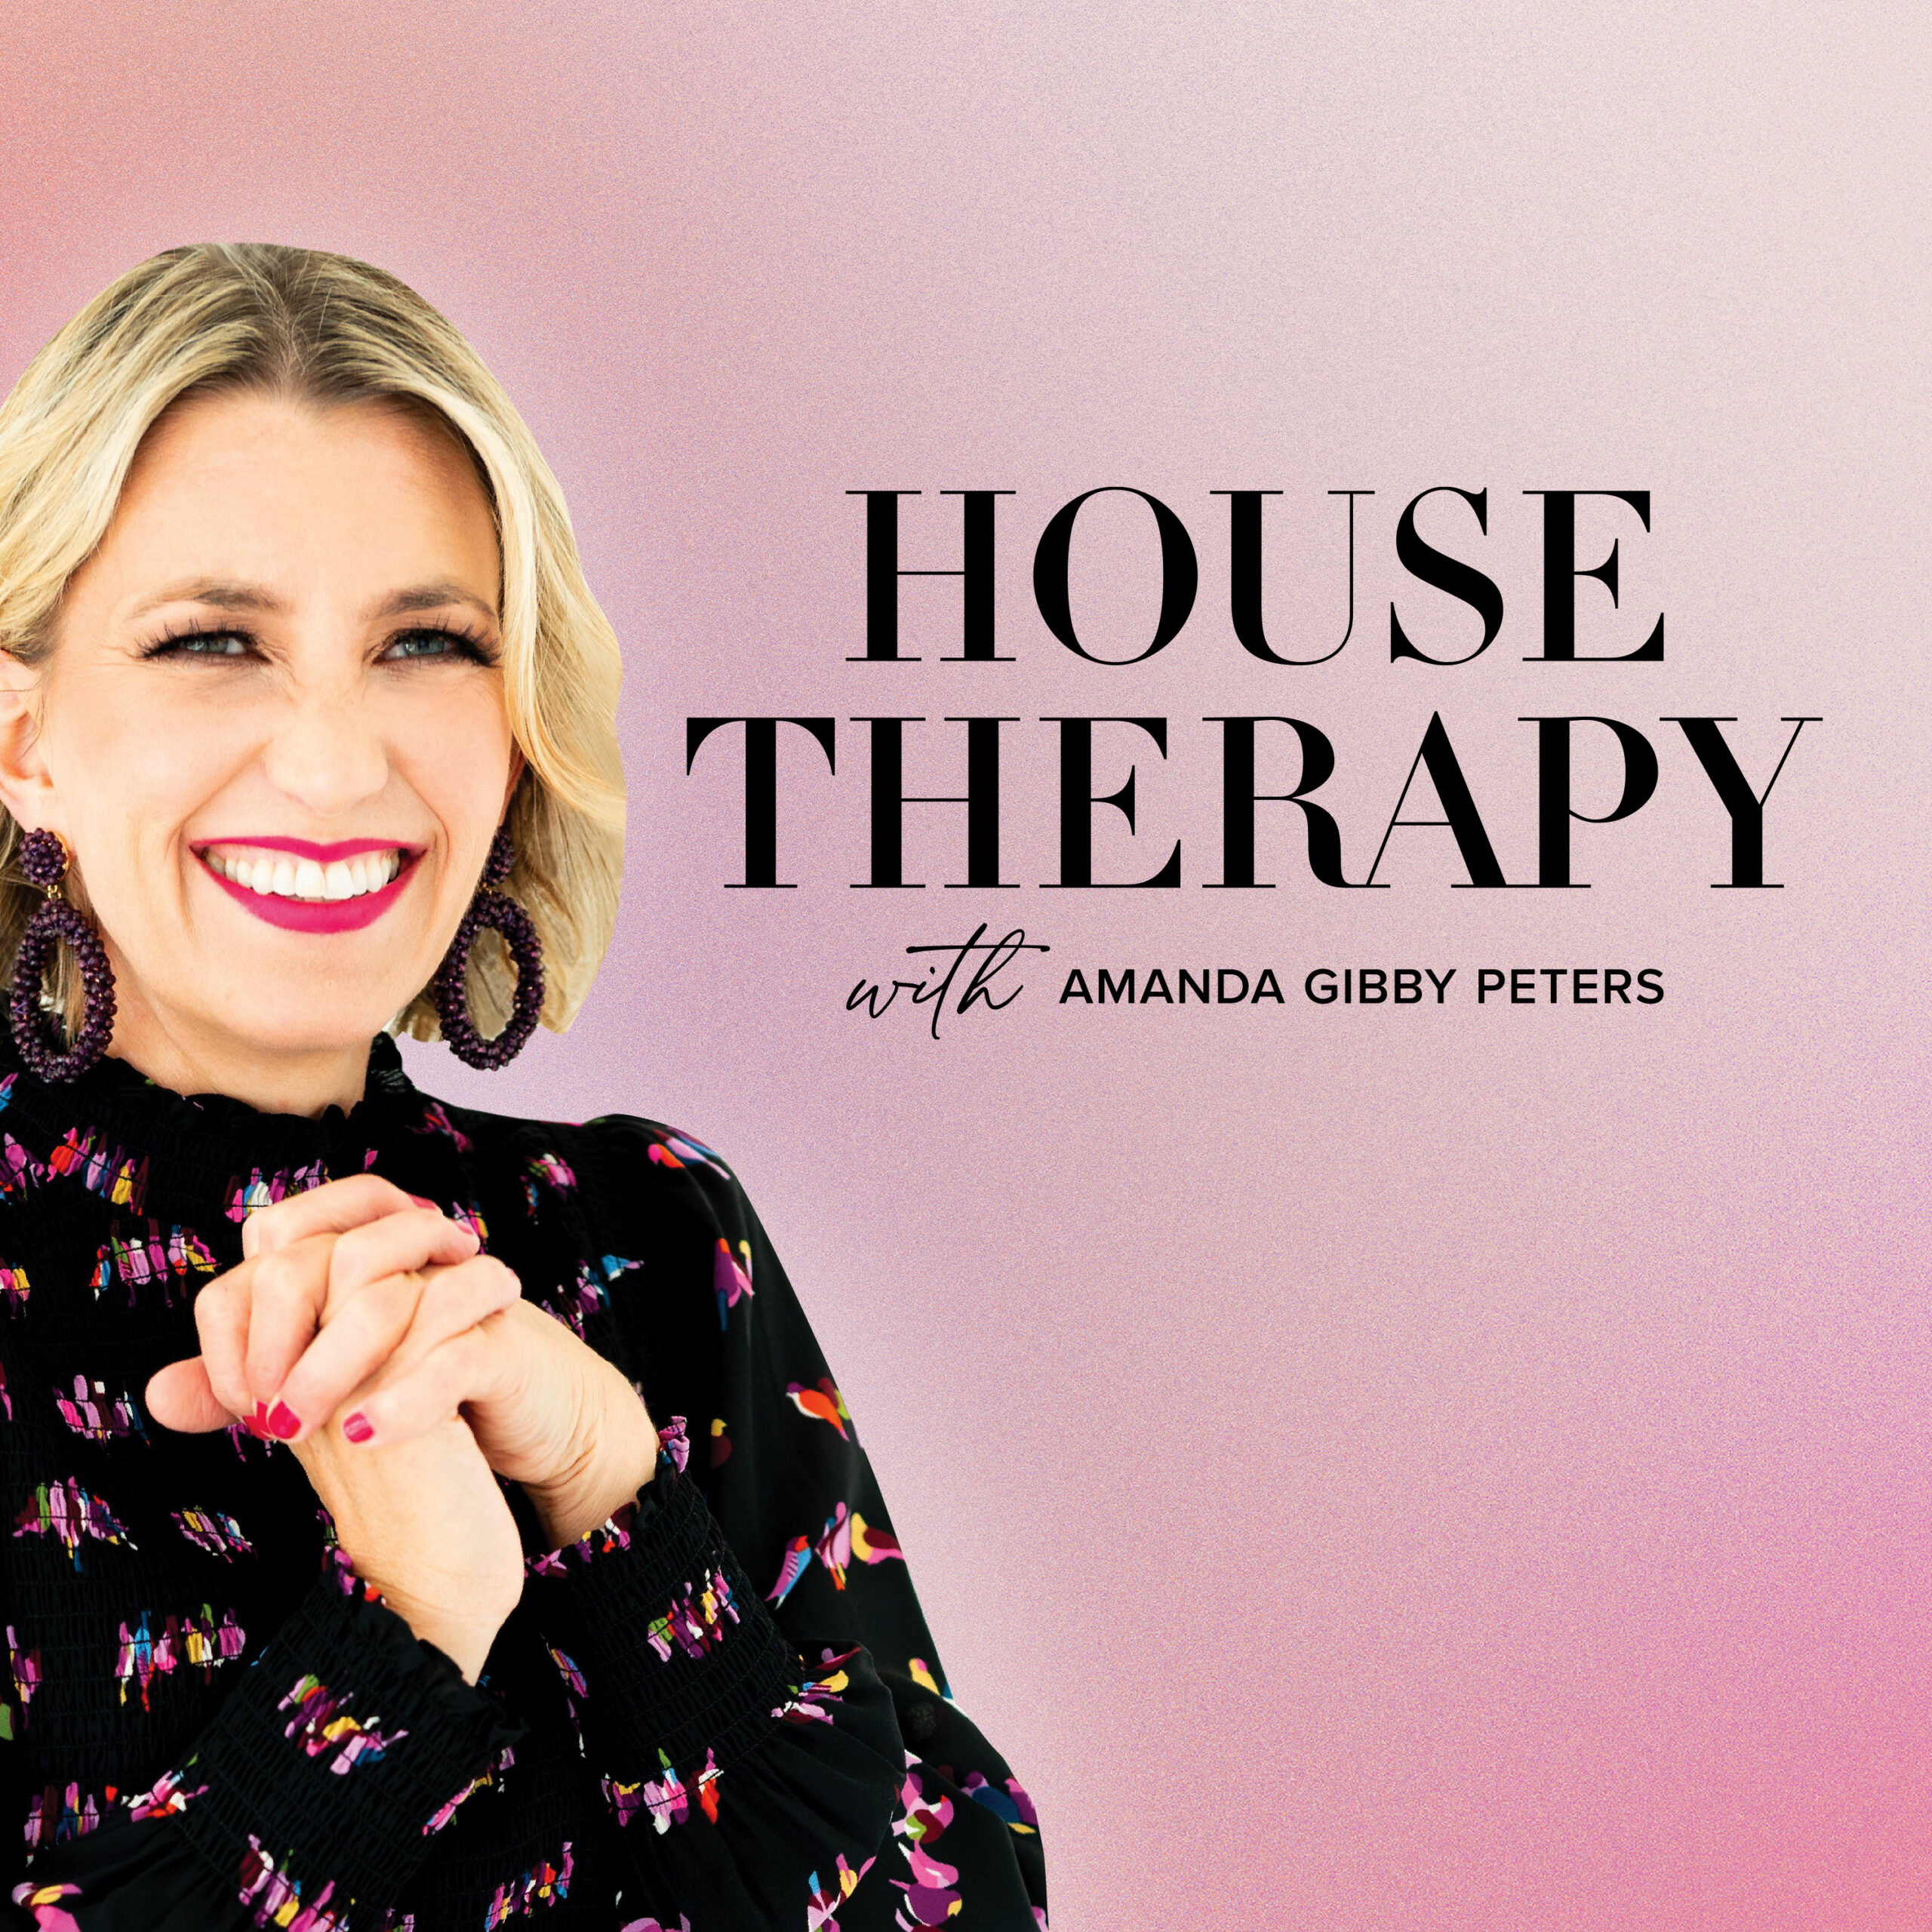 Welcome to House Therapy